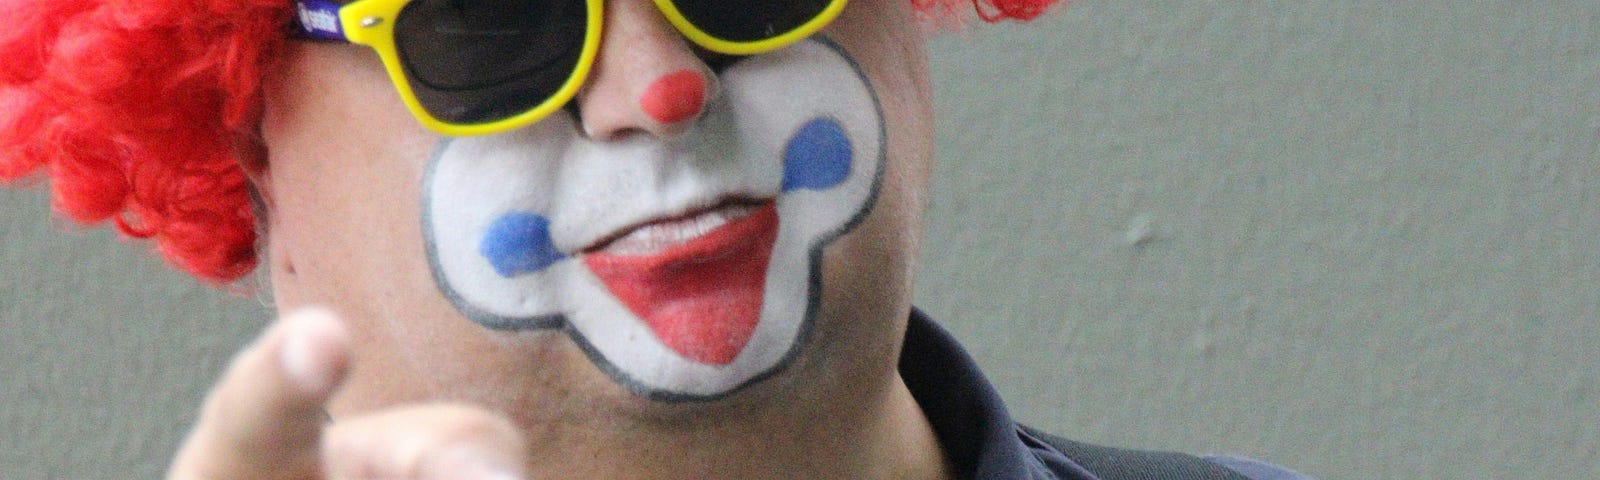 A photo of a clown in a red wig with yellow sunglasses, wearing a police badge